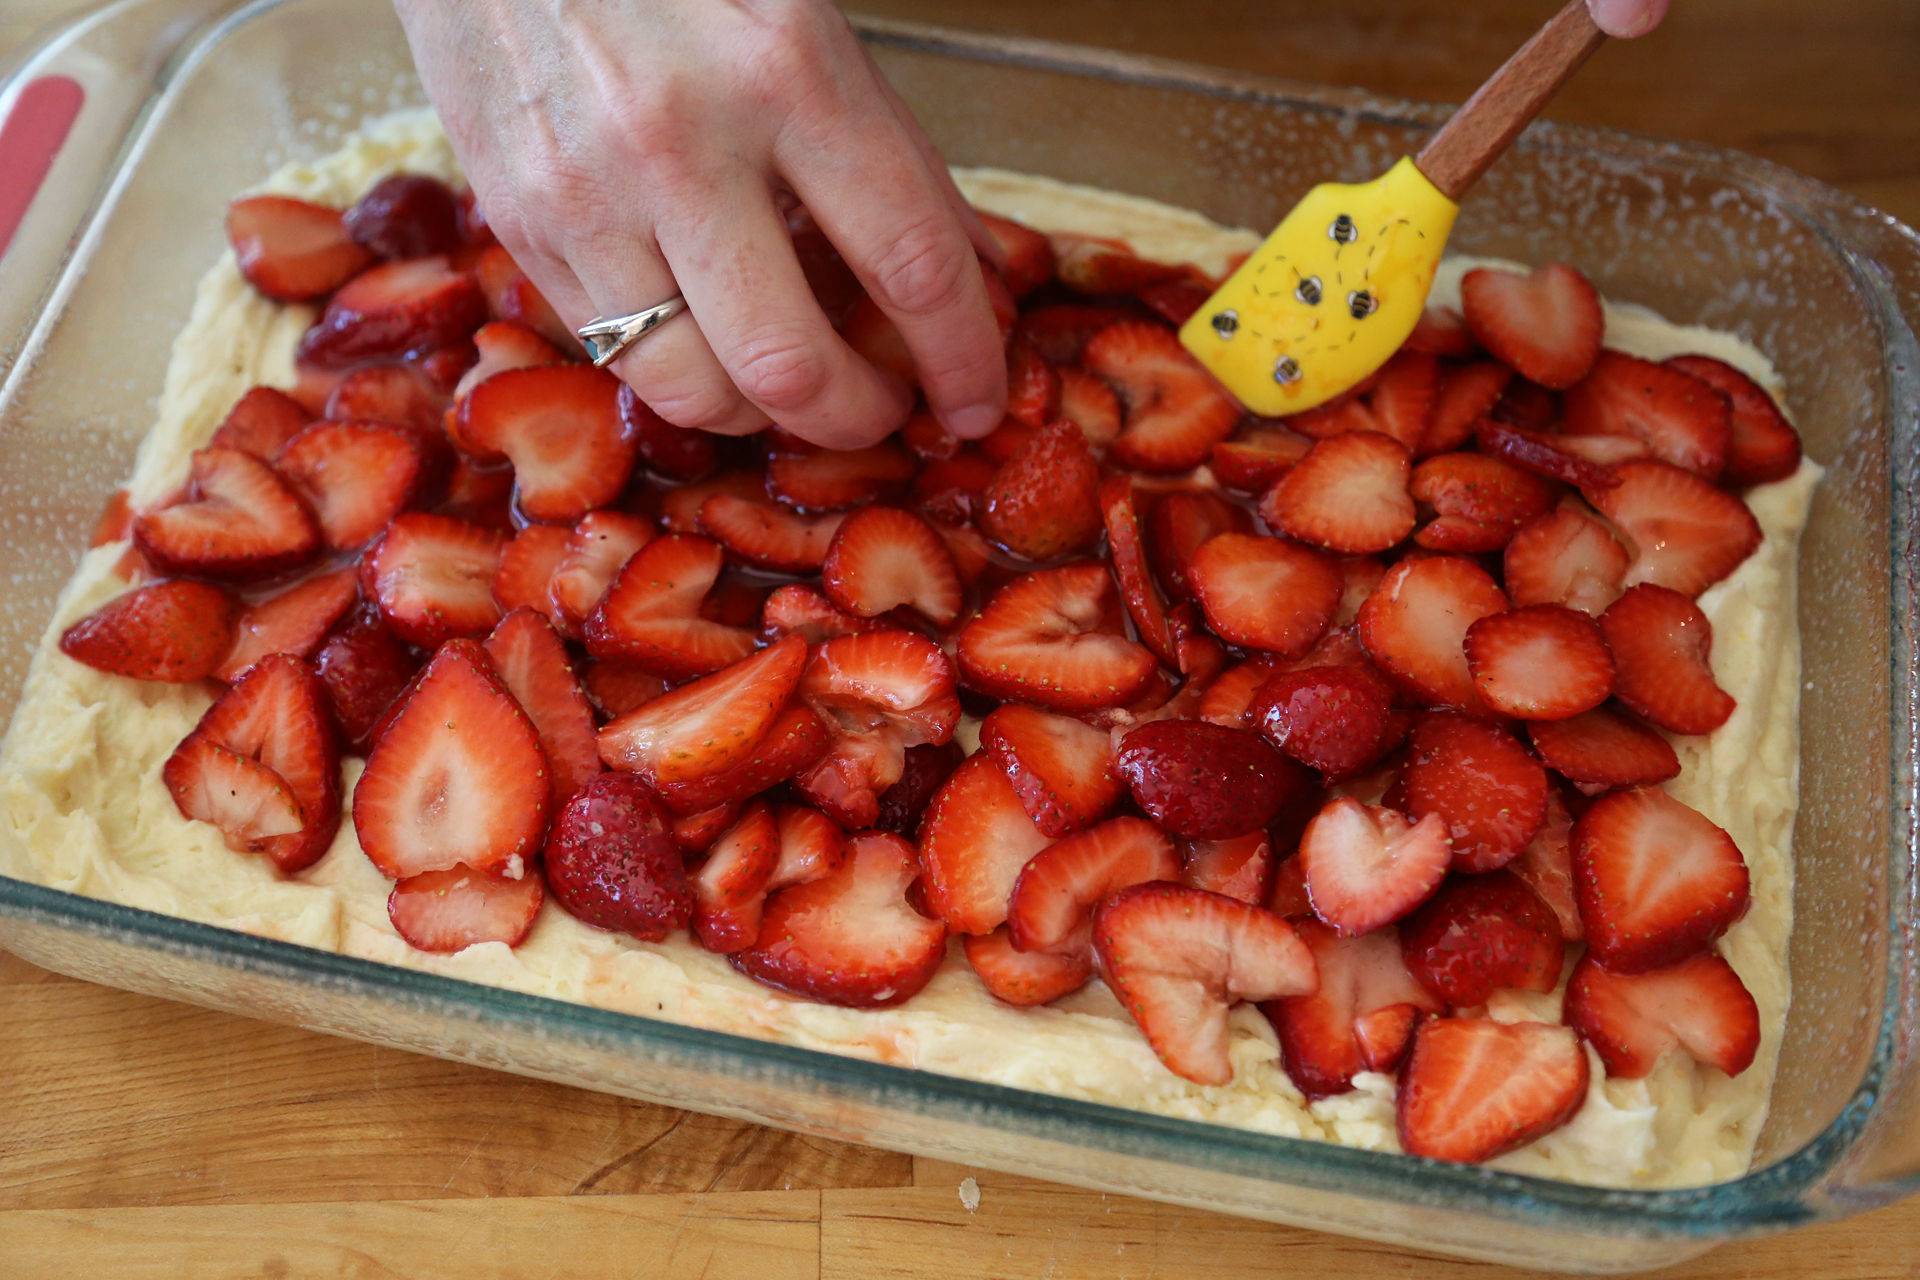 Top with the strawberry mixture, leaving a 1/2 inch border around the outside of the batter.